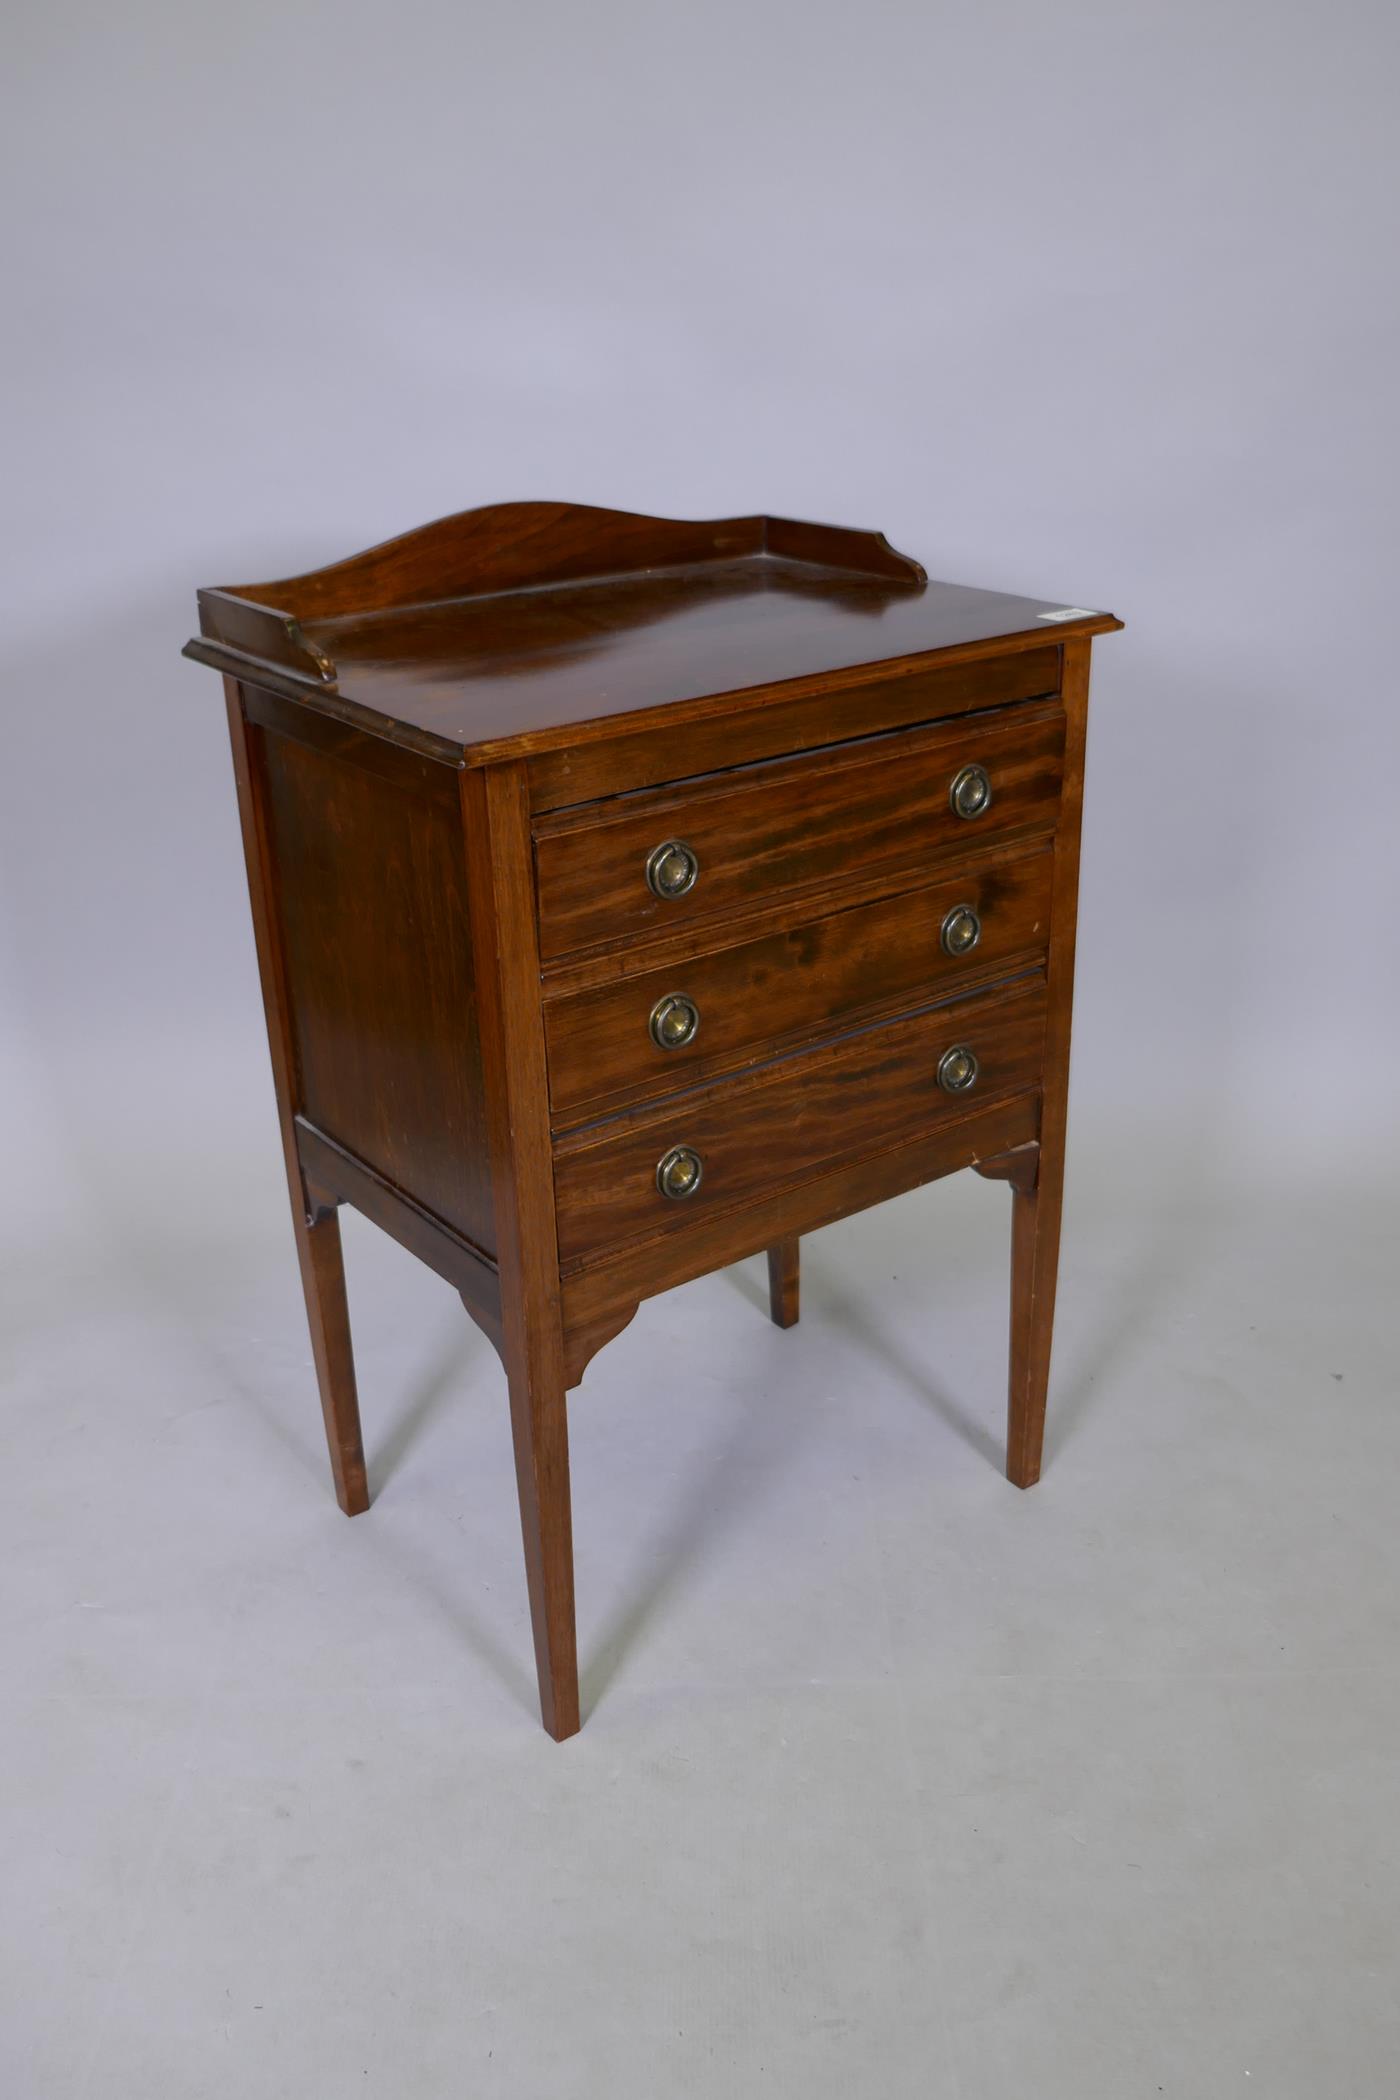 A mahogany three drawer music sheet cabinet with a three quarter gallery and square tapering